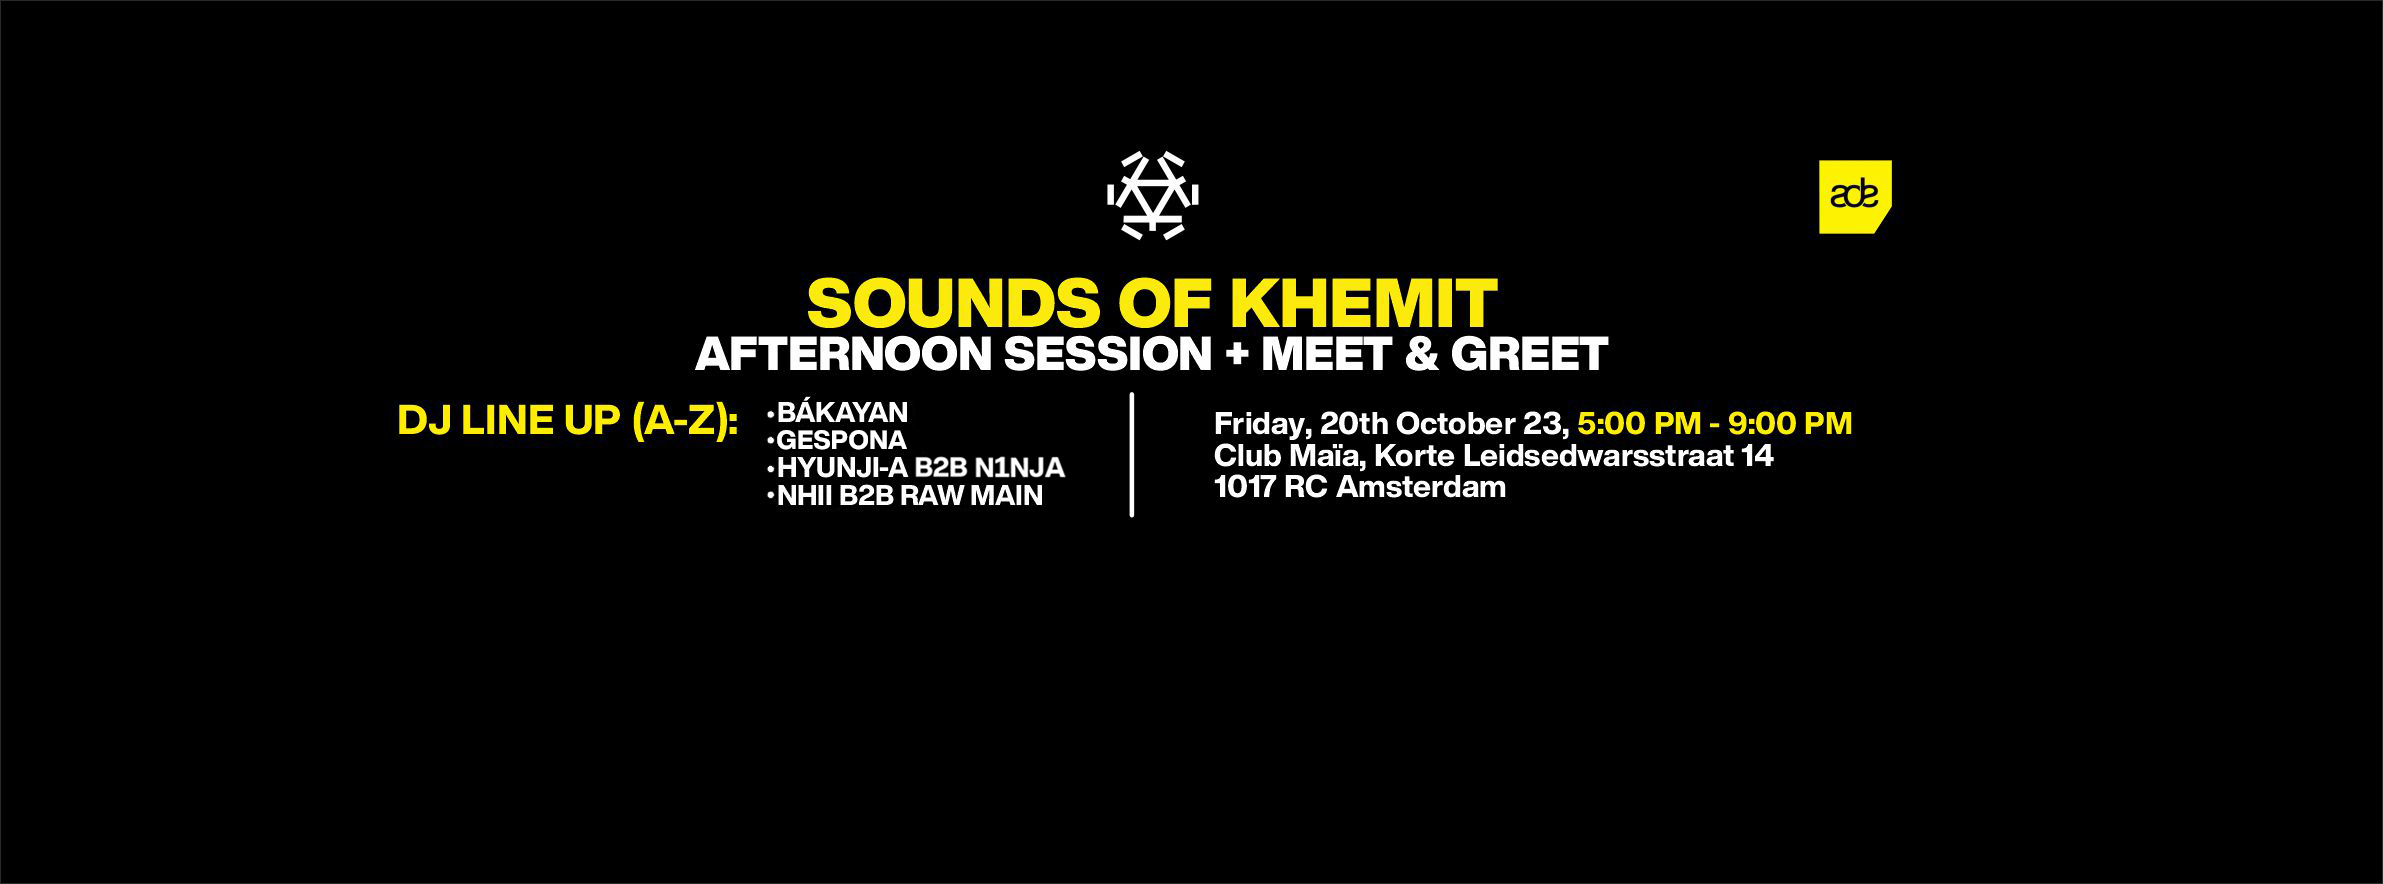 ADE Sounds of Khemit Afternoon Sessions + Meet & Greet - フライヤー表